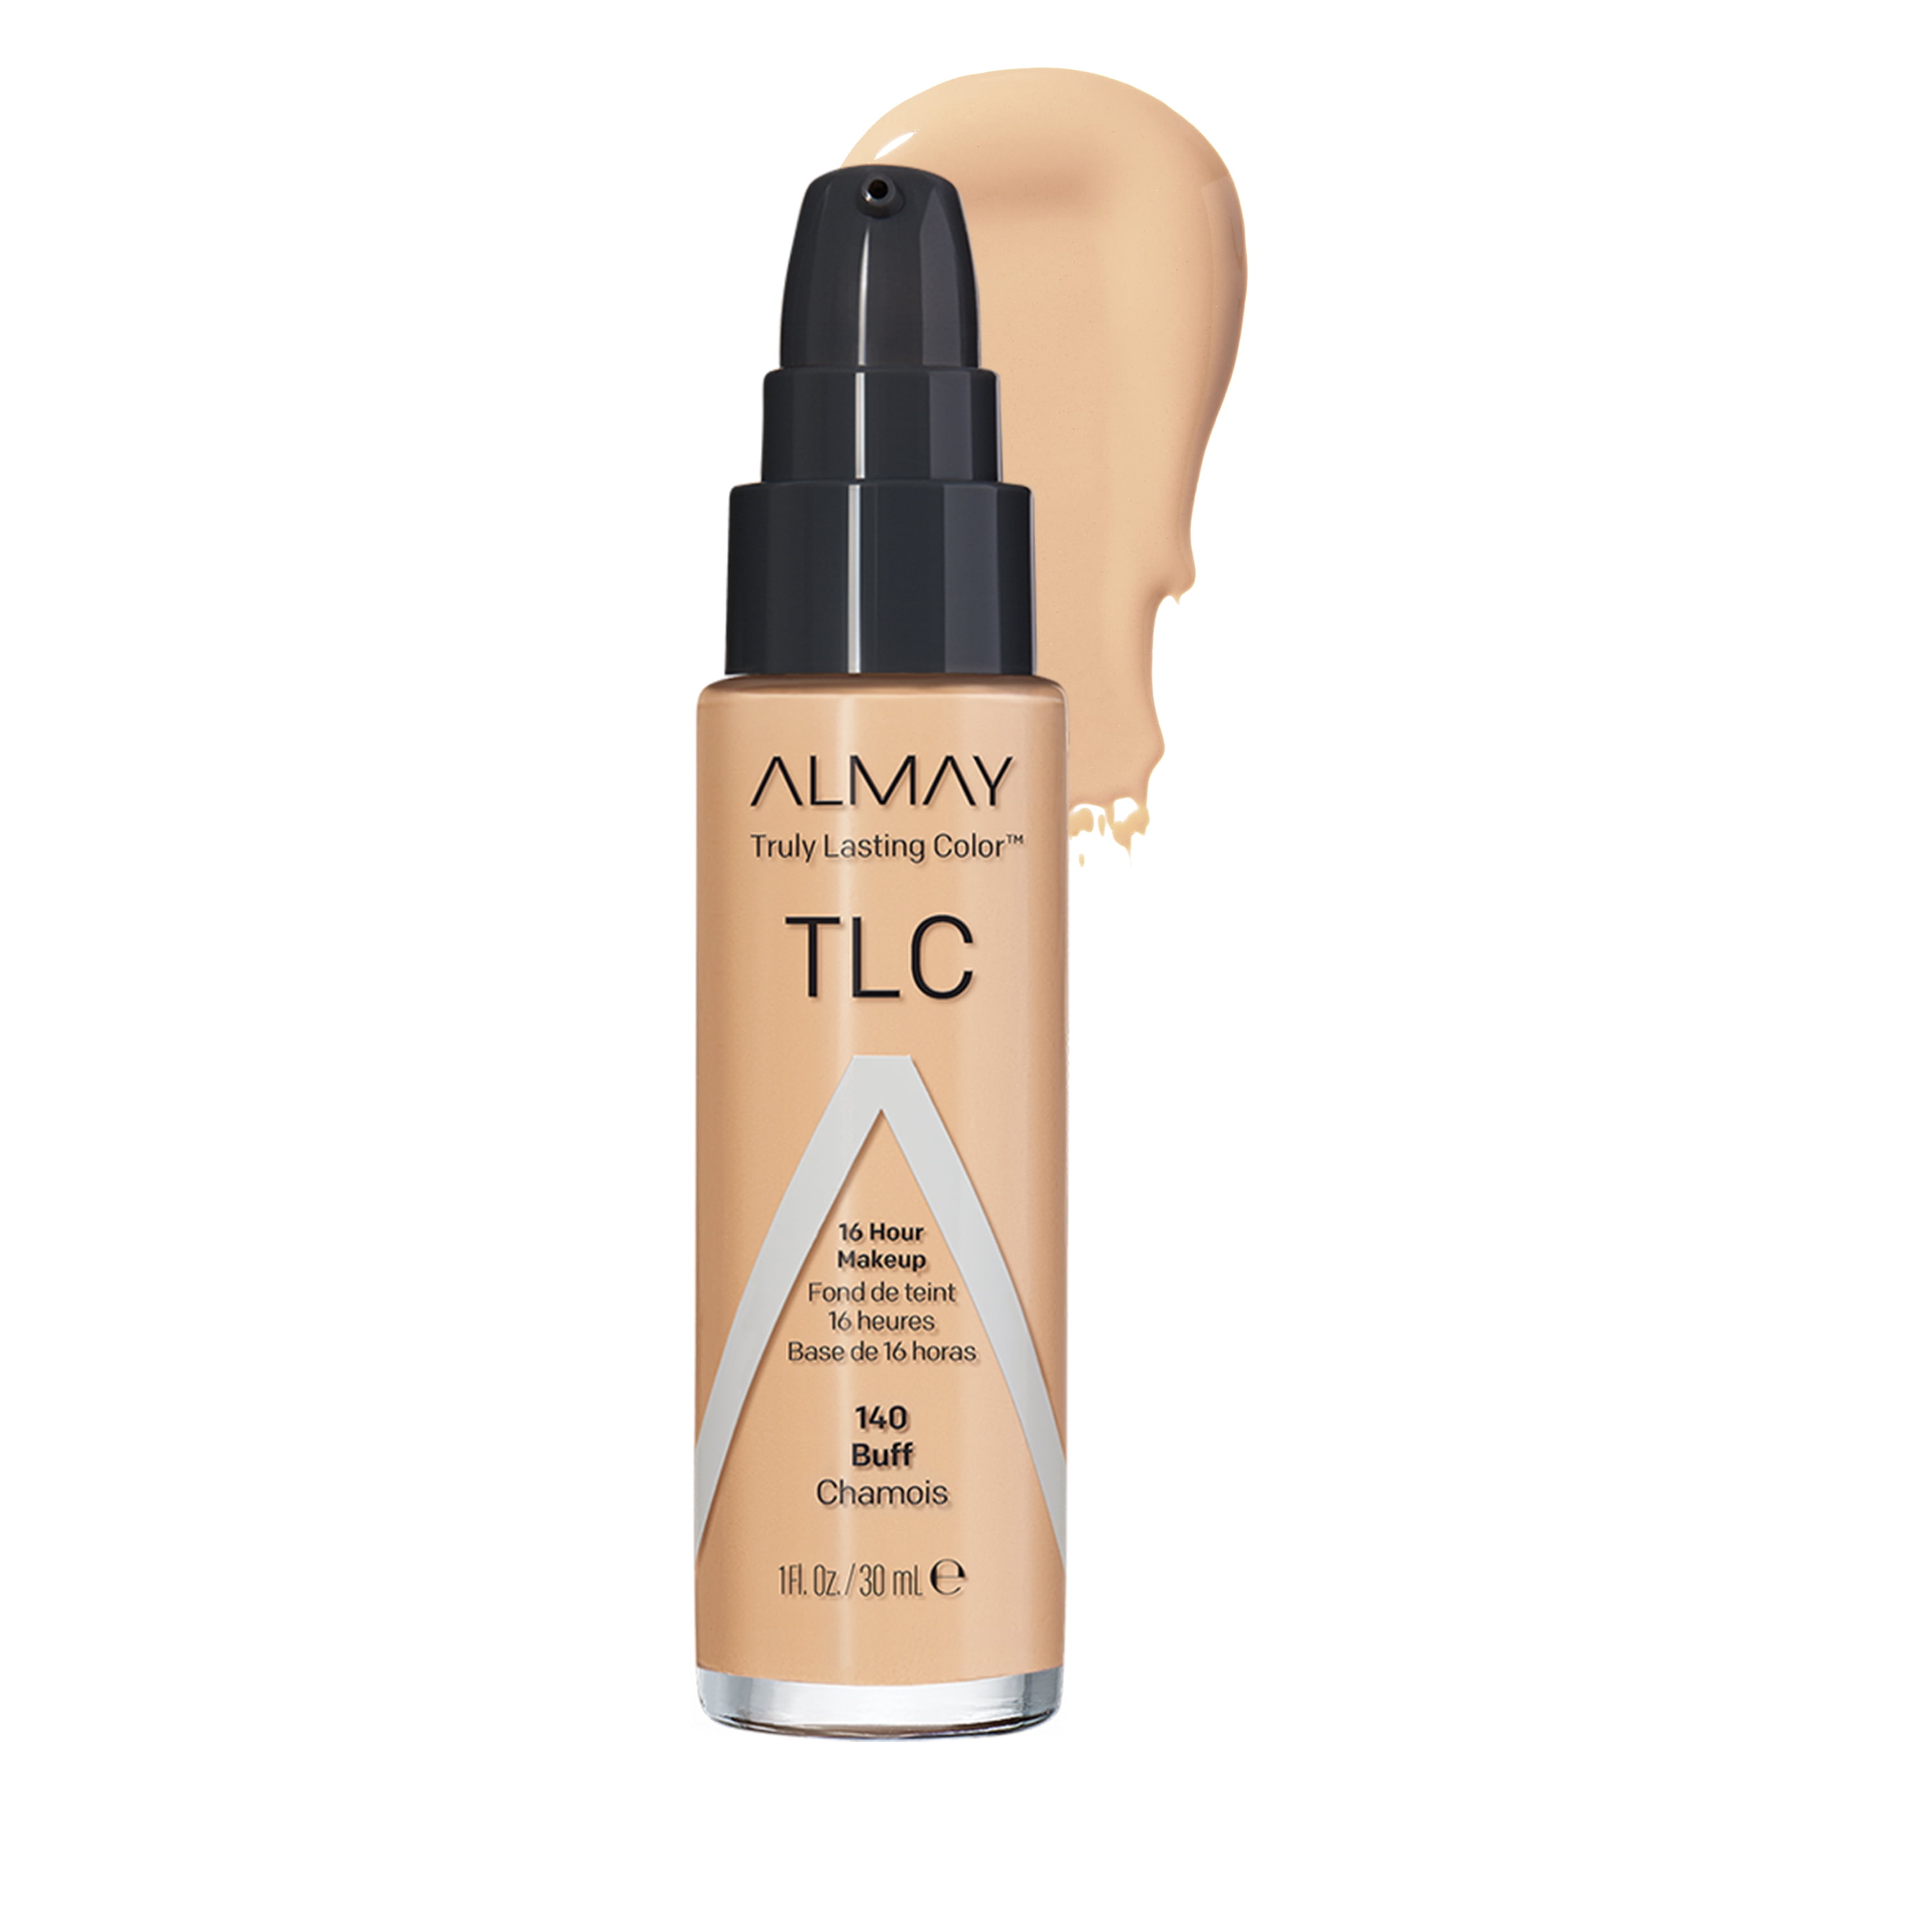 Almay Truly Lasting Color Liquid Makeup, Hypoallergenic, Cruelty, Oil, Fragrance Free, Dermatologist Tested, Long Wearing Foundation, 1 fl oz - 140 Buff